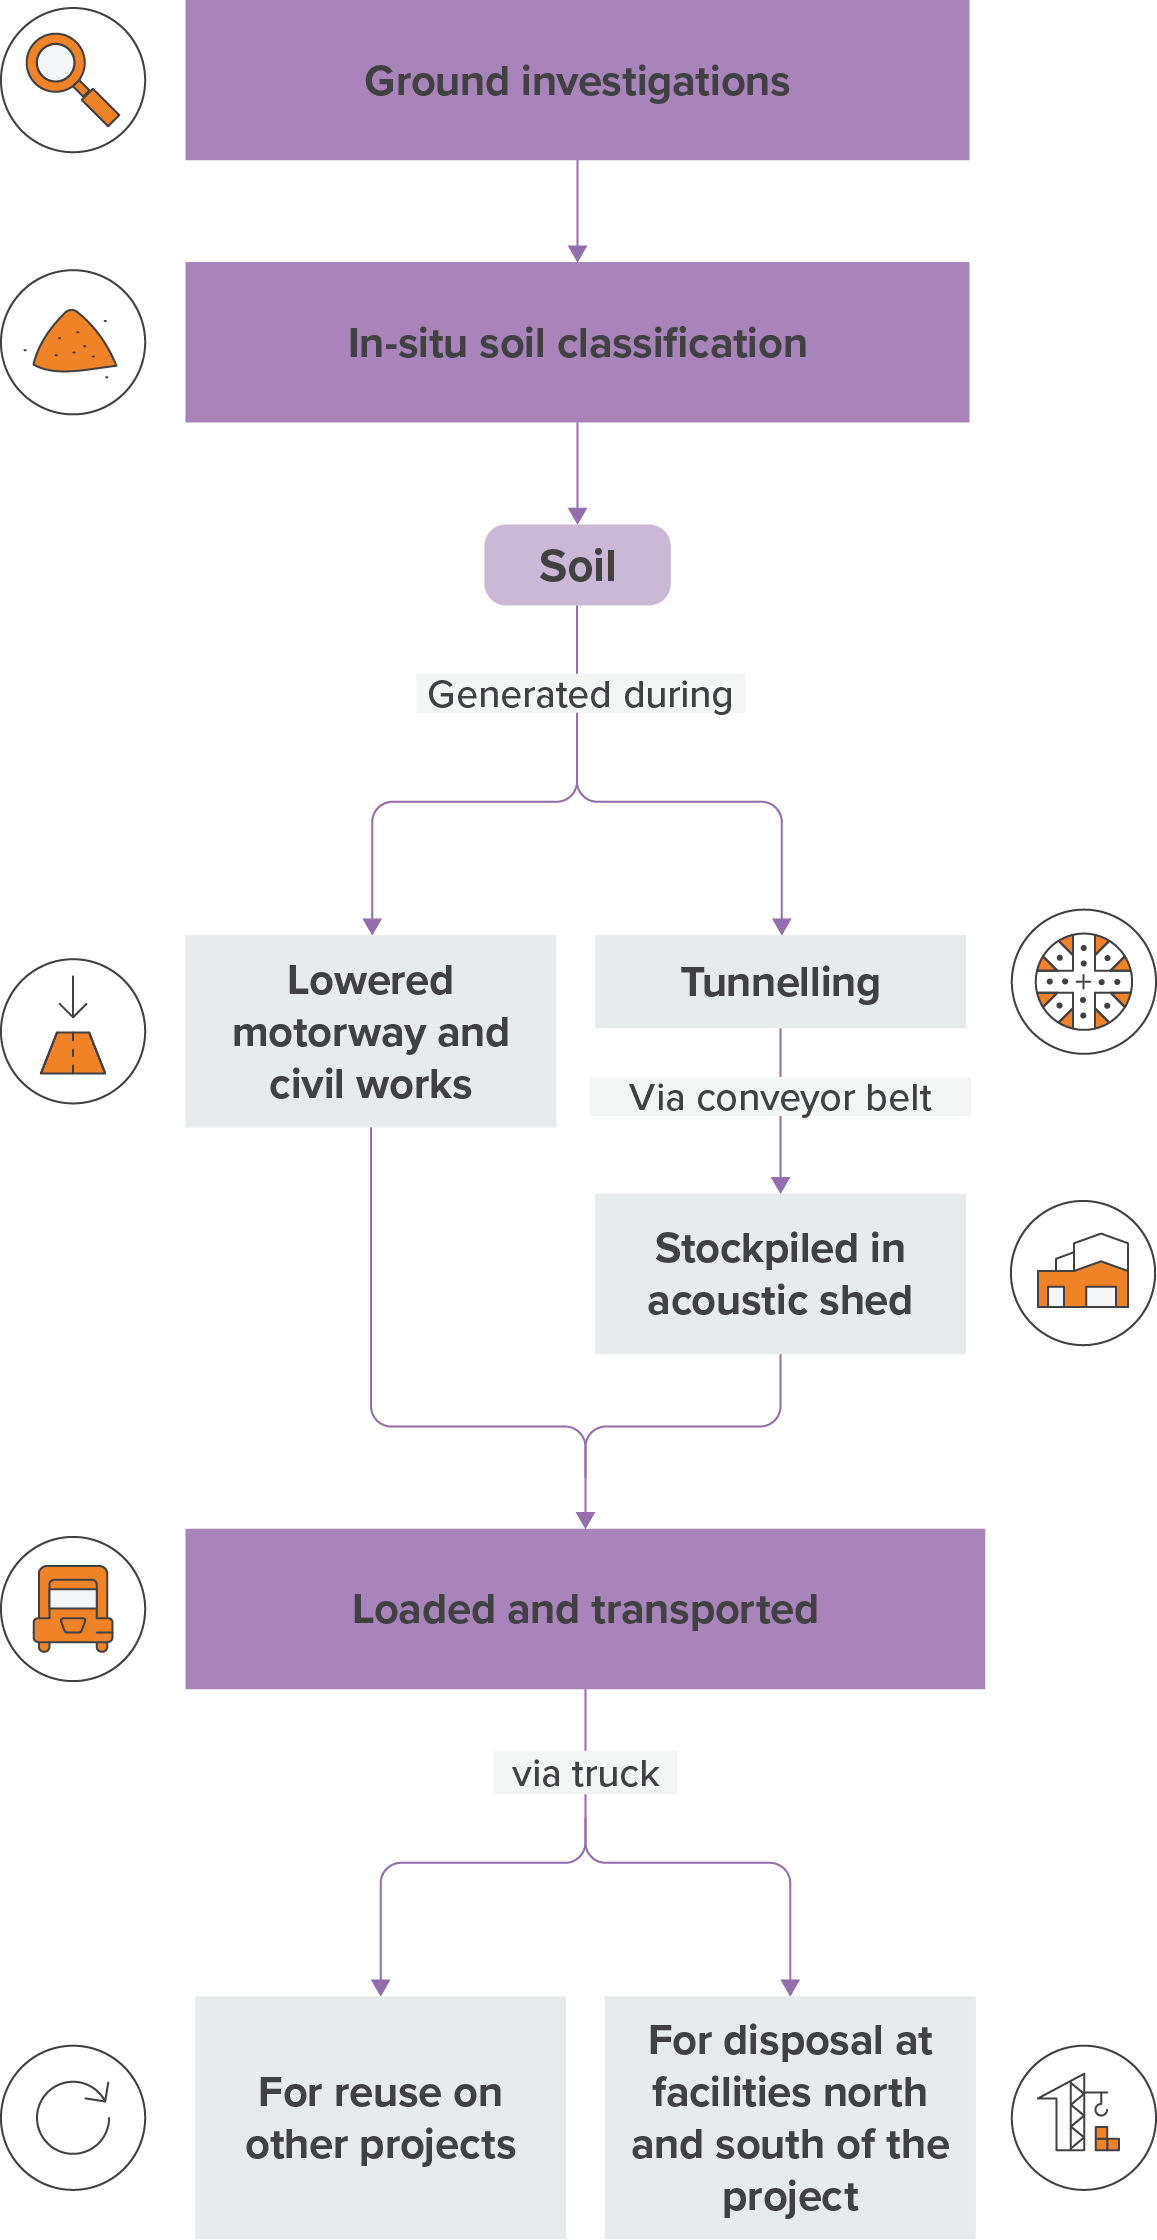 Soil flow chart. Ground investigations are used to classify in-situ soil. The soil generated during lower motorway and civil work, tunnelling (which is moved by conveyer belt and stockpiled in acoustic shed) is loaded and transport by truck. It is the reused on other projects or moved for disposal at facilities north and south of the project.